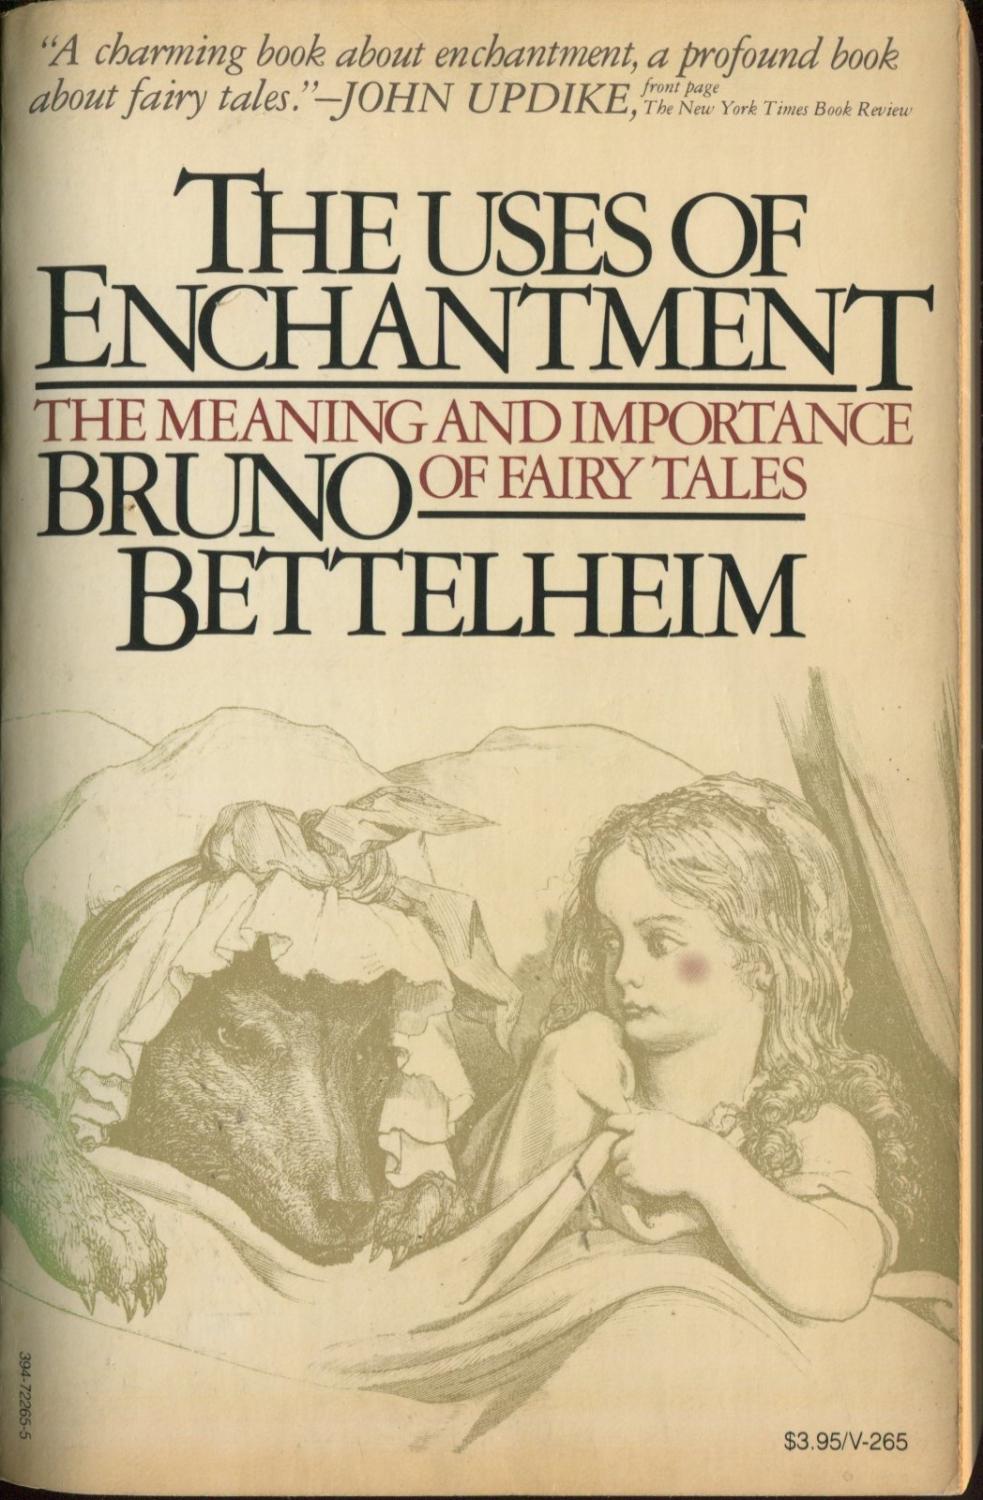 The Uses of Enchantment The Meaning & Importance of Fairy Tales by